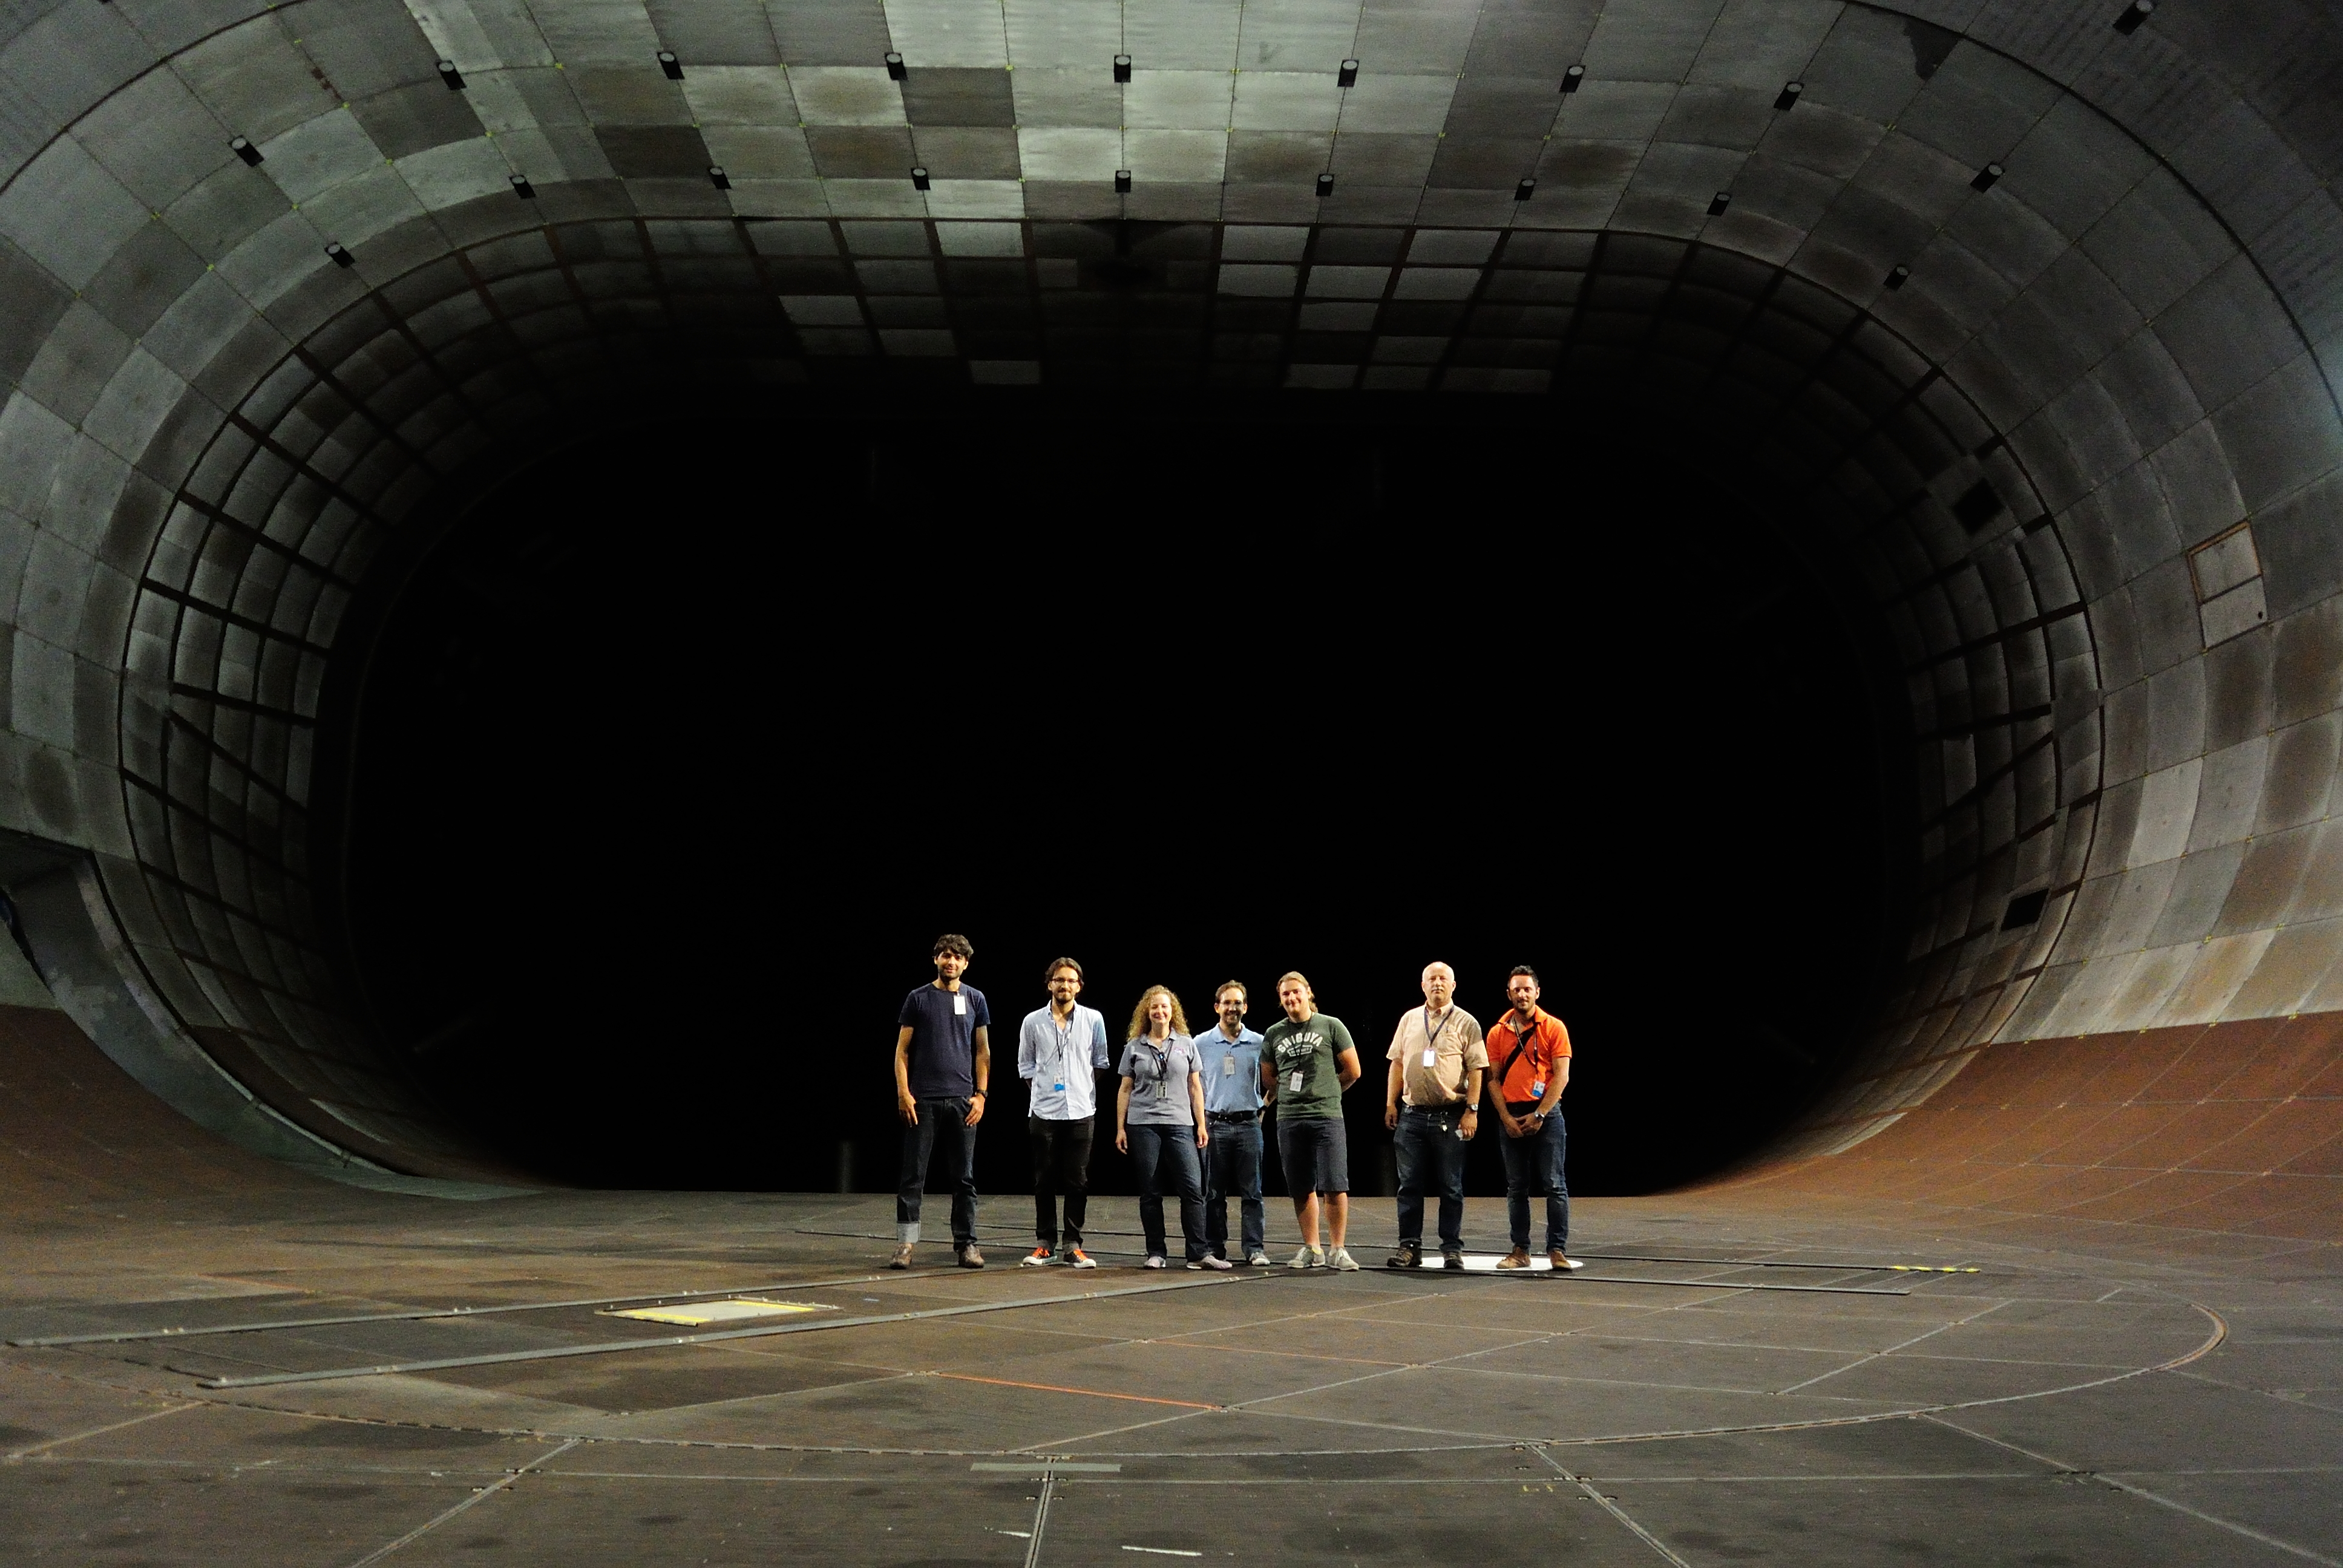 Lab photo: inside the test section of the 80x120 foot wind tunnel at NASA Ames Research Center